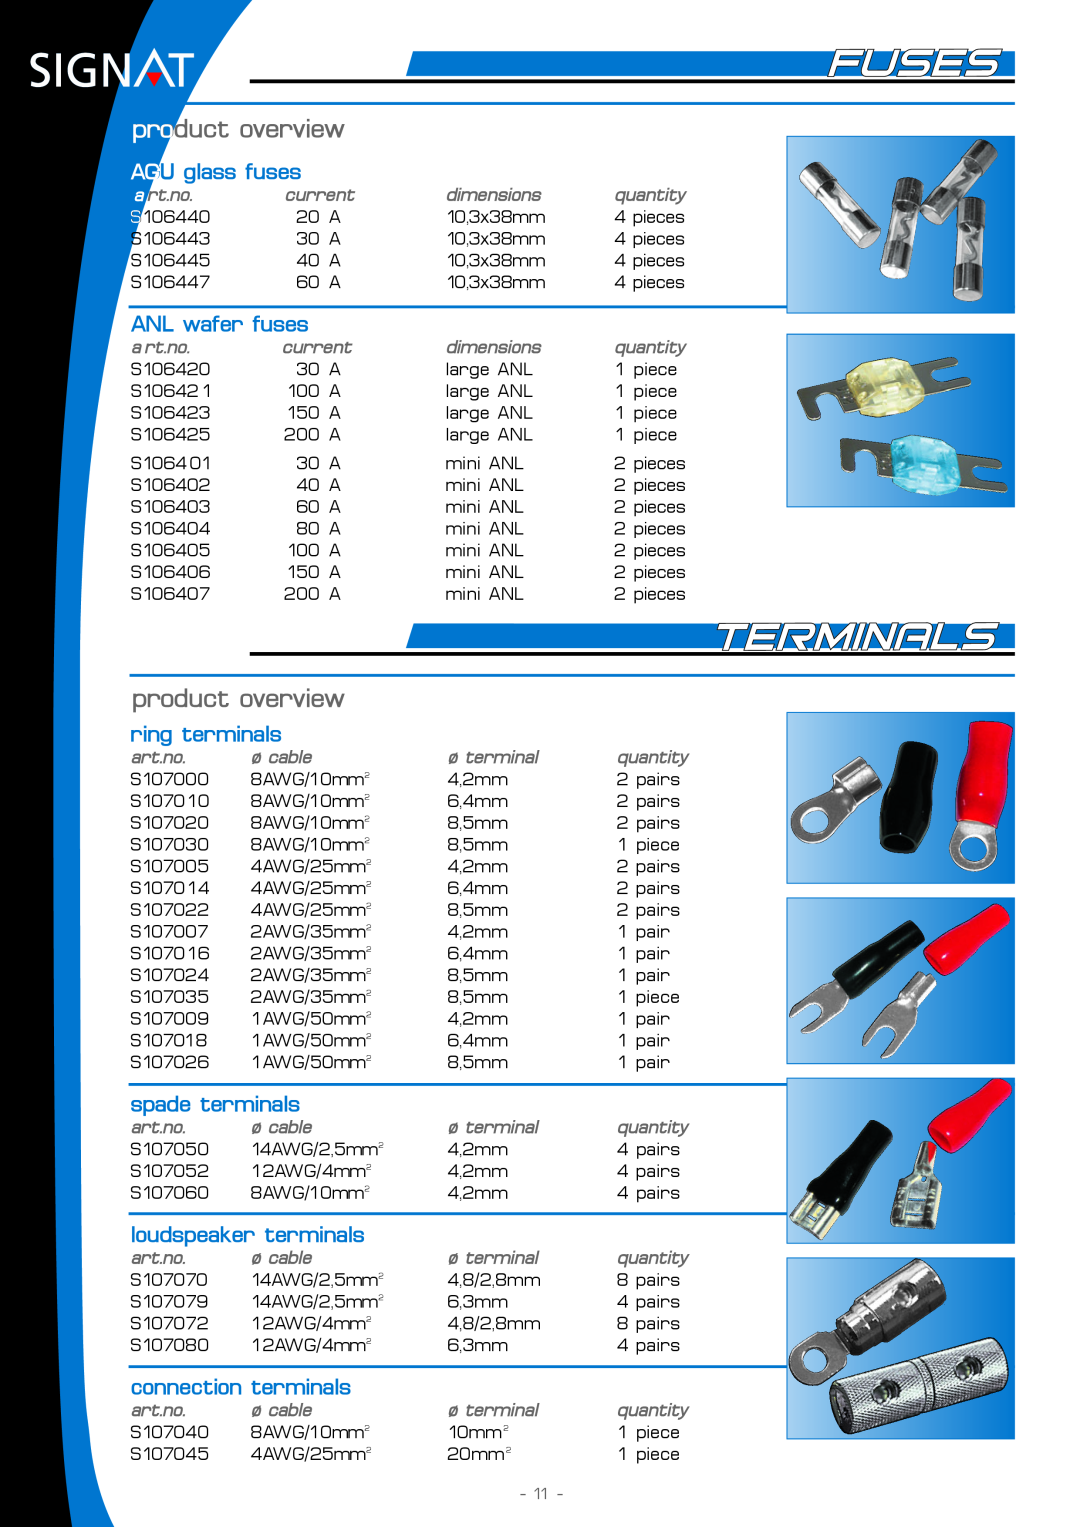 Signat S104105, S104201, S104001 AGU glass fuses, ANL wafer fuses, product overview ring terminals, spade terminals 